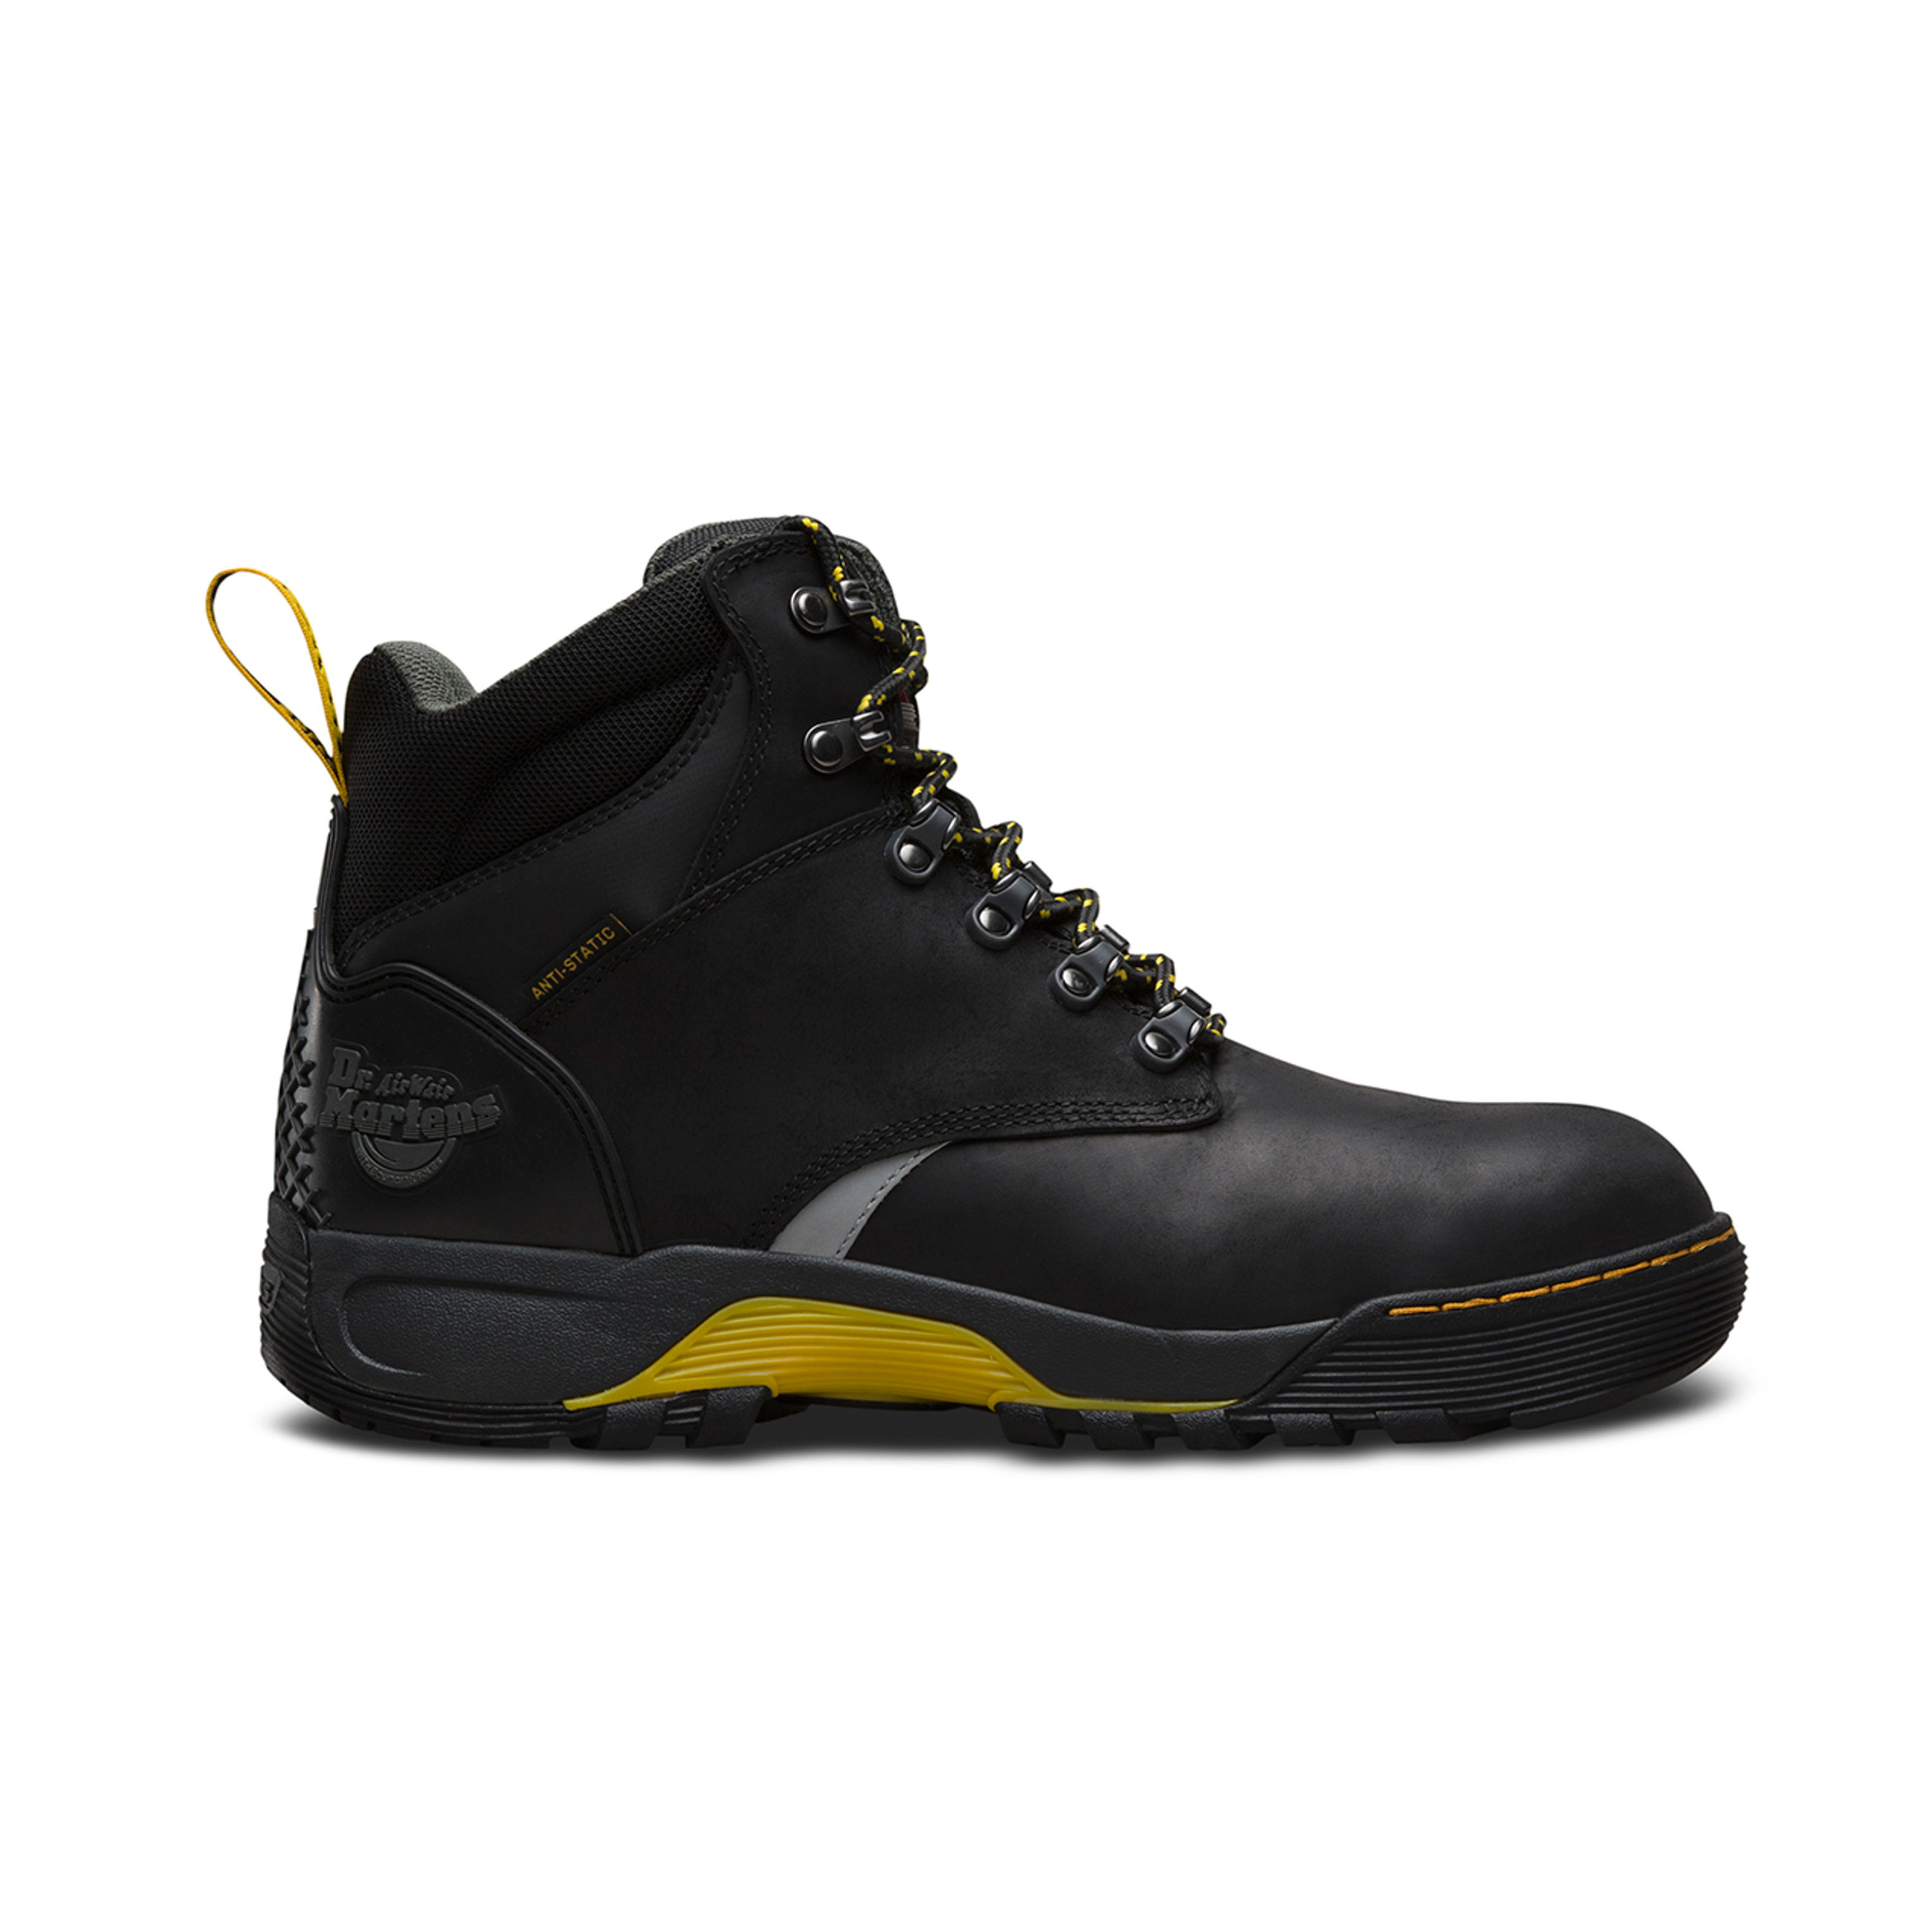 Dr. Martens 'Ridge ST' Hiker-Style Safety Boots for Him